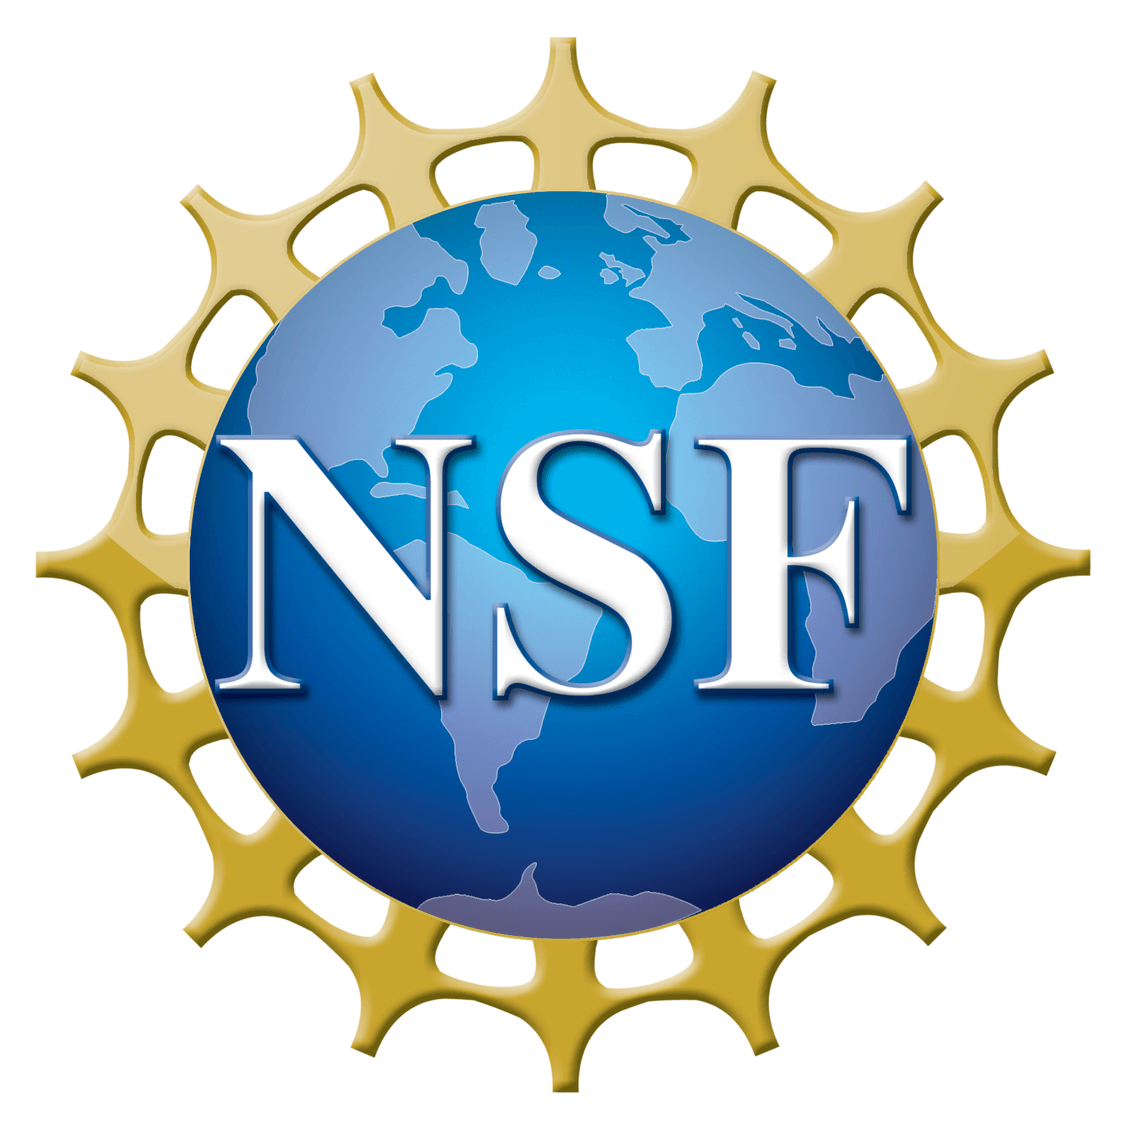 National Science Foundation logo, A blue globe of the earth with small golden figures standing on the edges of the globe. All the figures are connected with thin gold arms. Superimposed on the globe in white letters is NSF